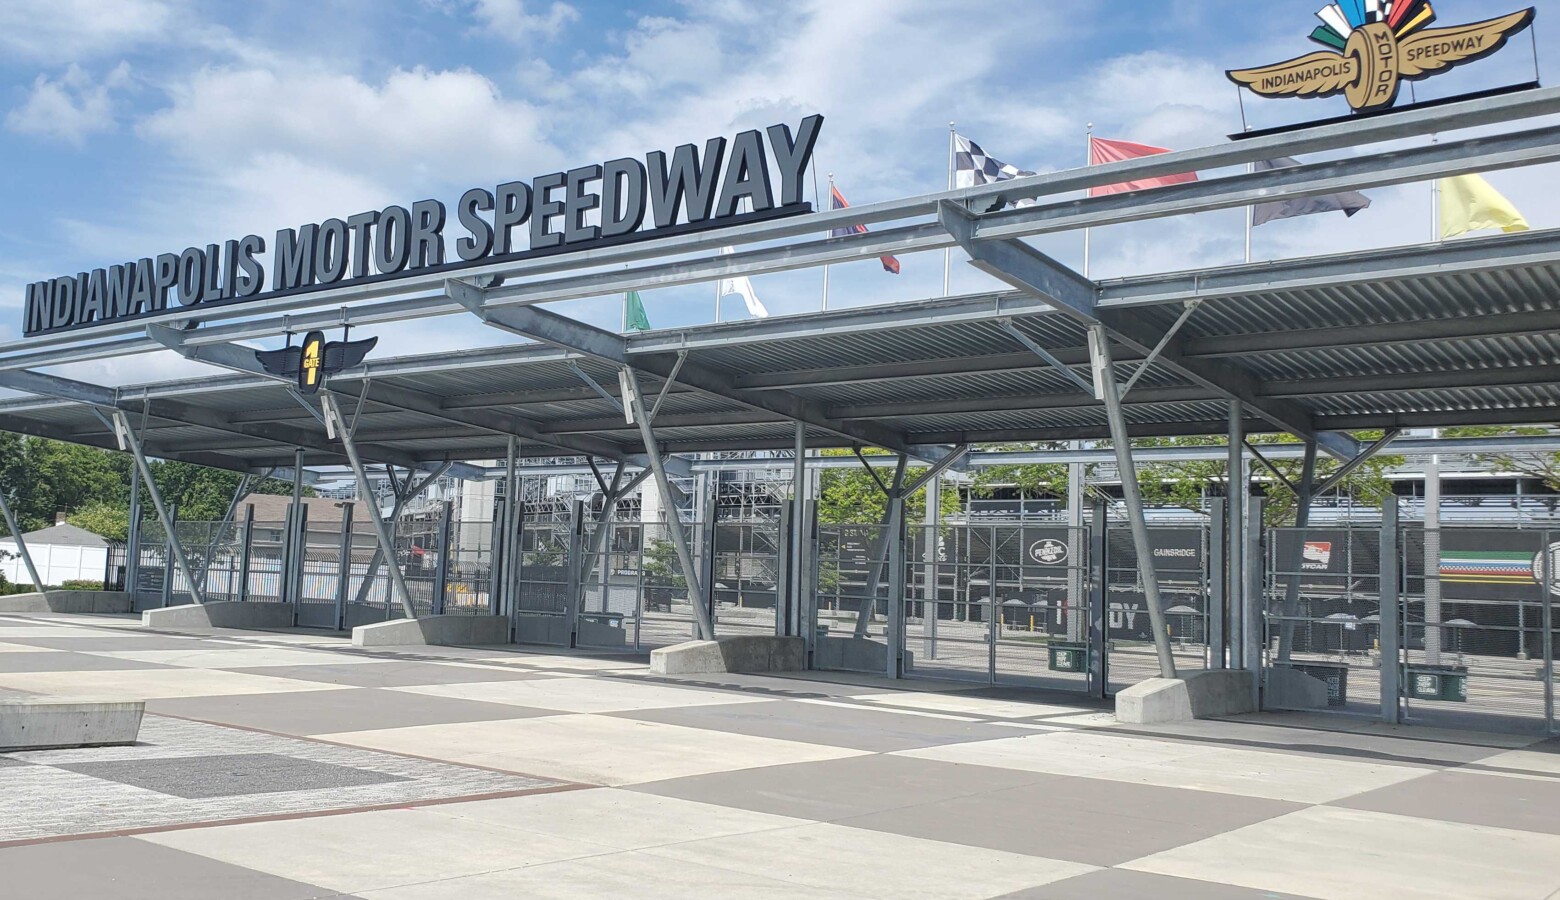 Indianapolis Motor Speedway Gate 1 where tens of thousands of fans would usually pass through to watch the Indy 500. (Samantha Horton/IPB News)